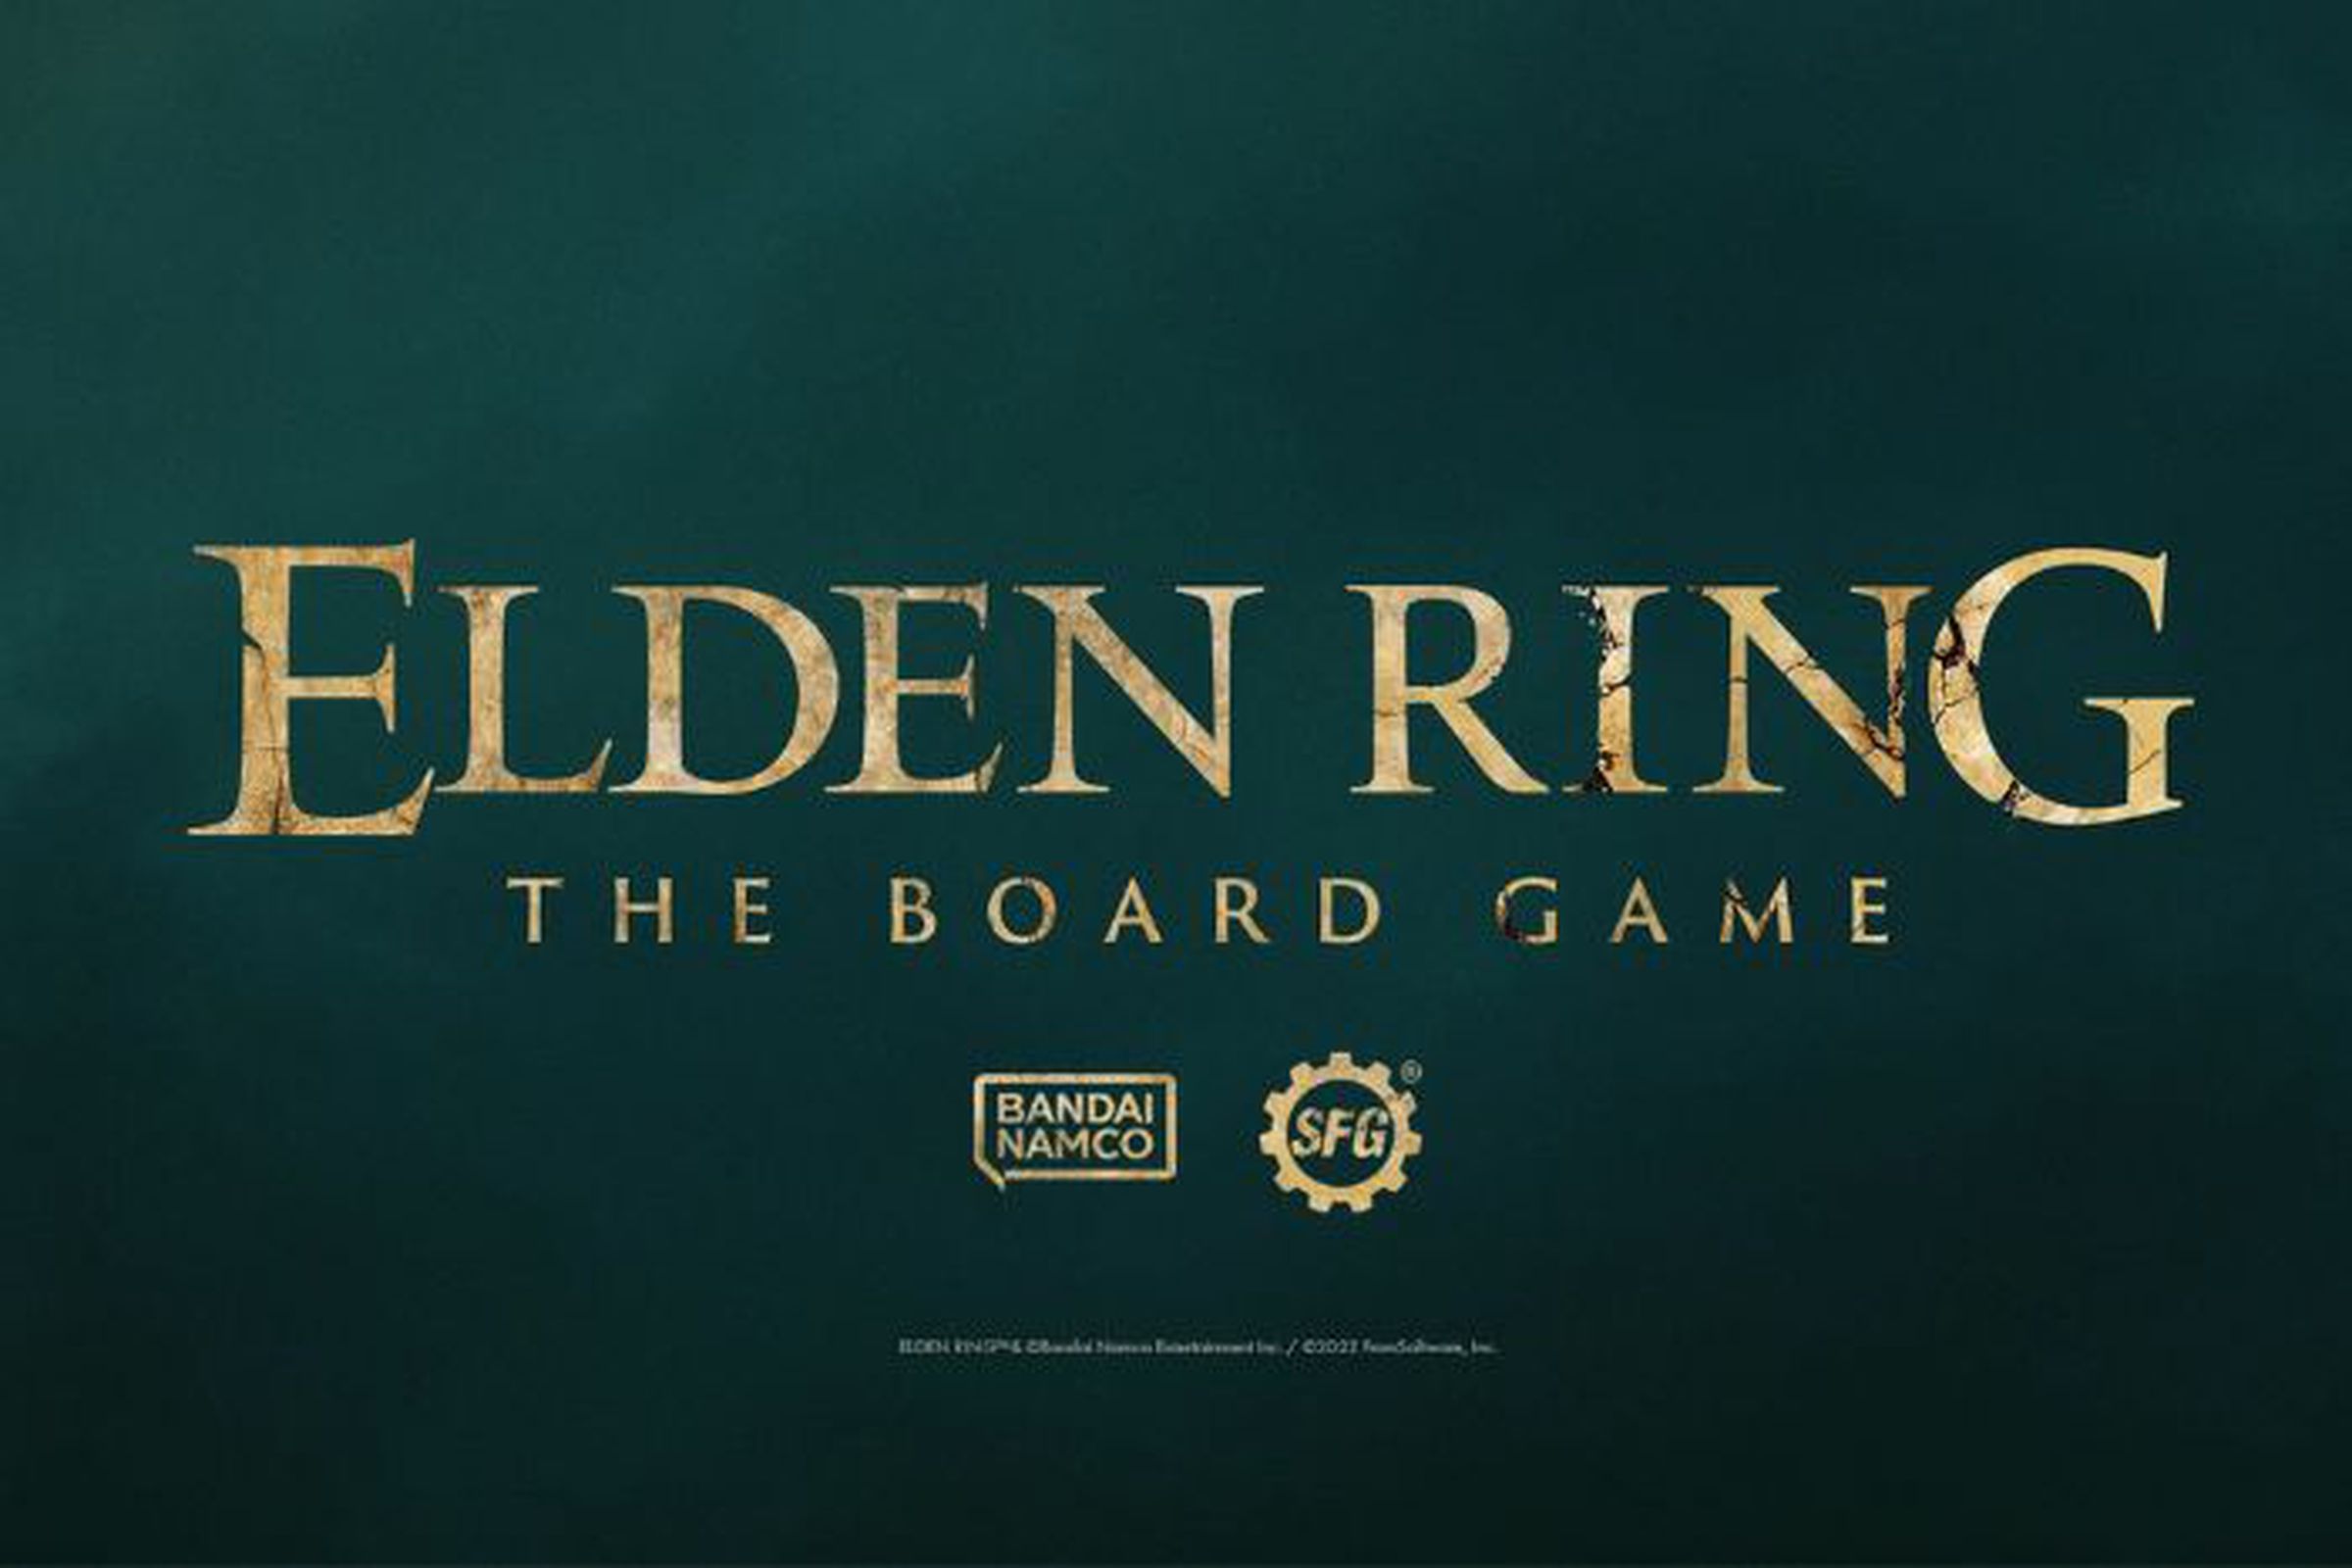 An image showing the logo for Elden Ring: The Board Game